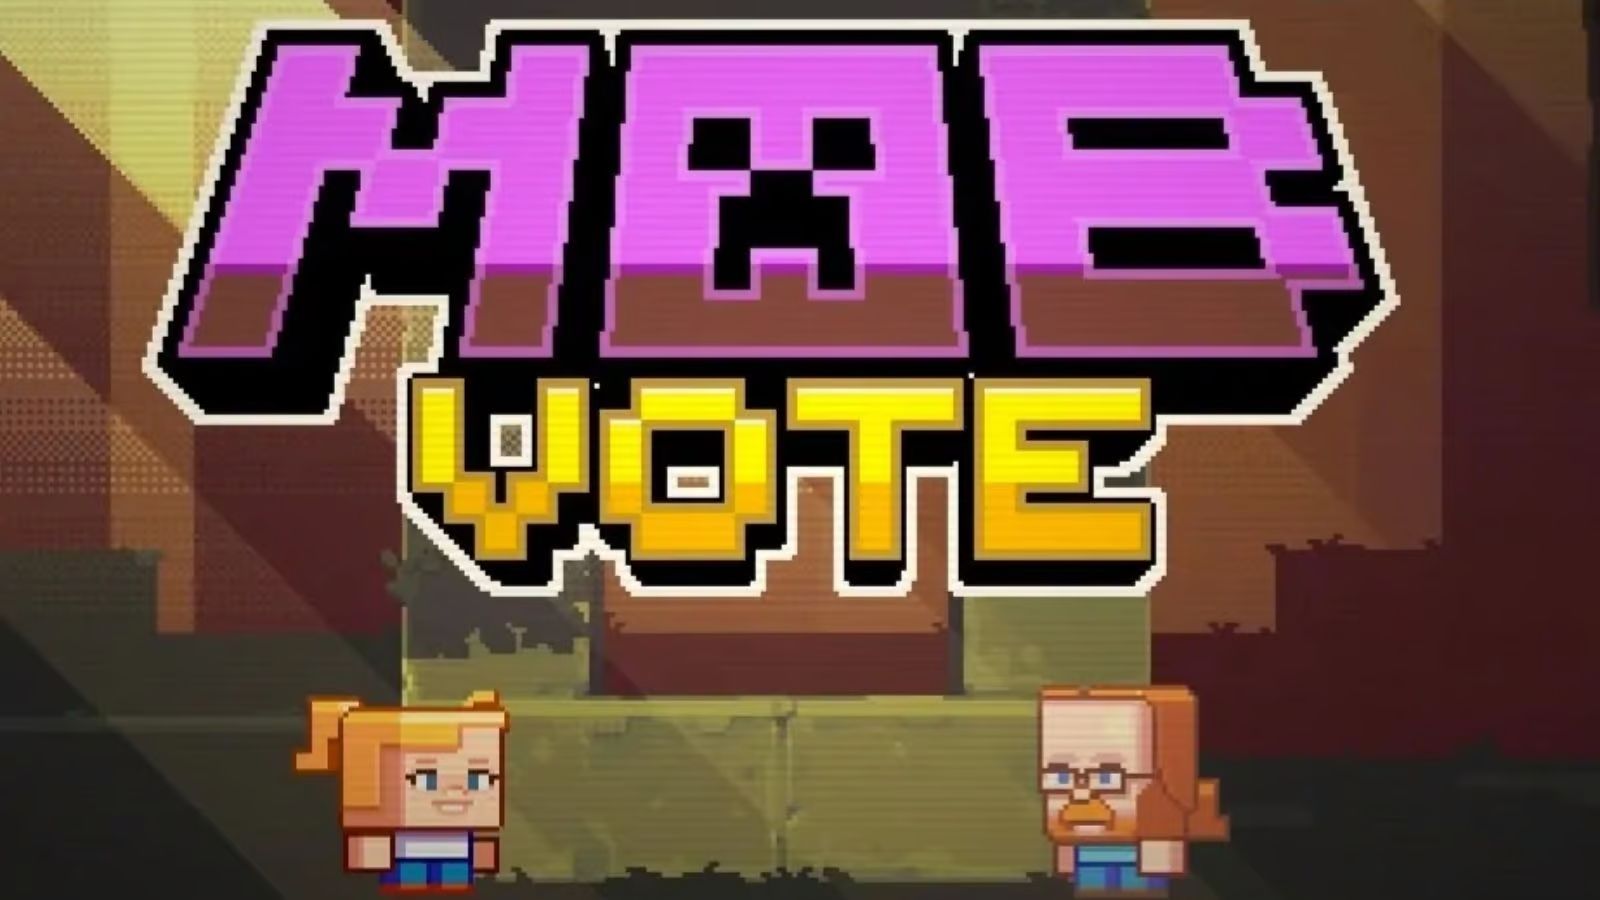 Minecraft 2022 mob vote results announced, sniffer to be added